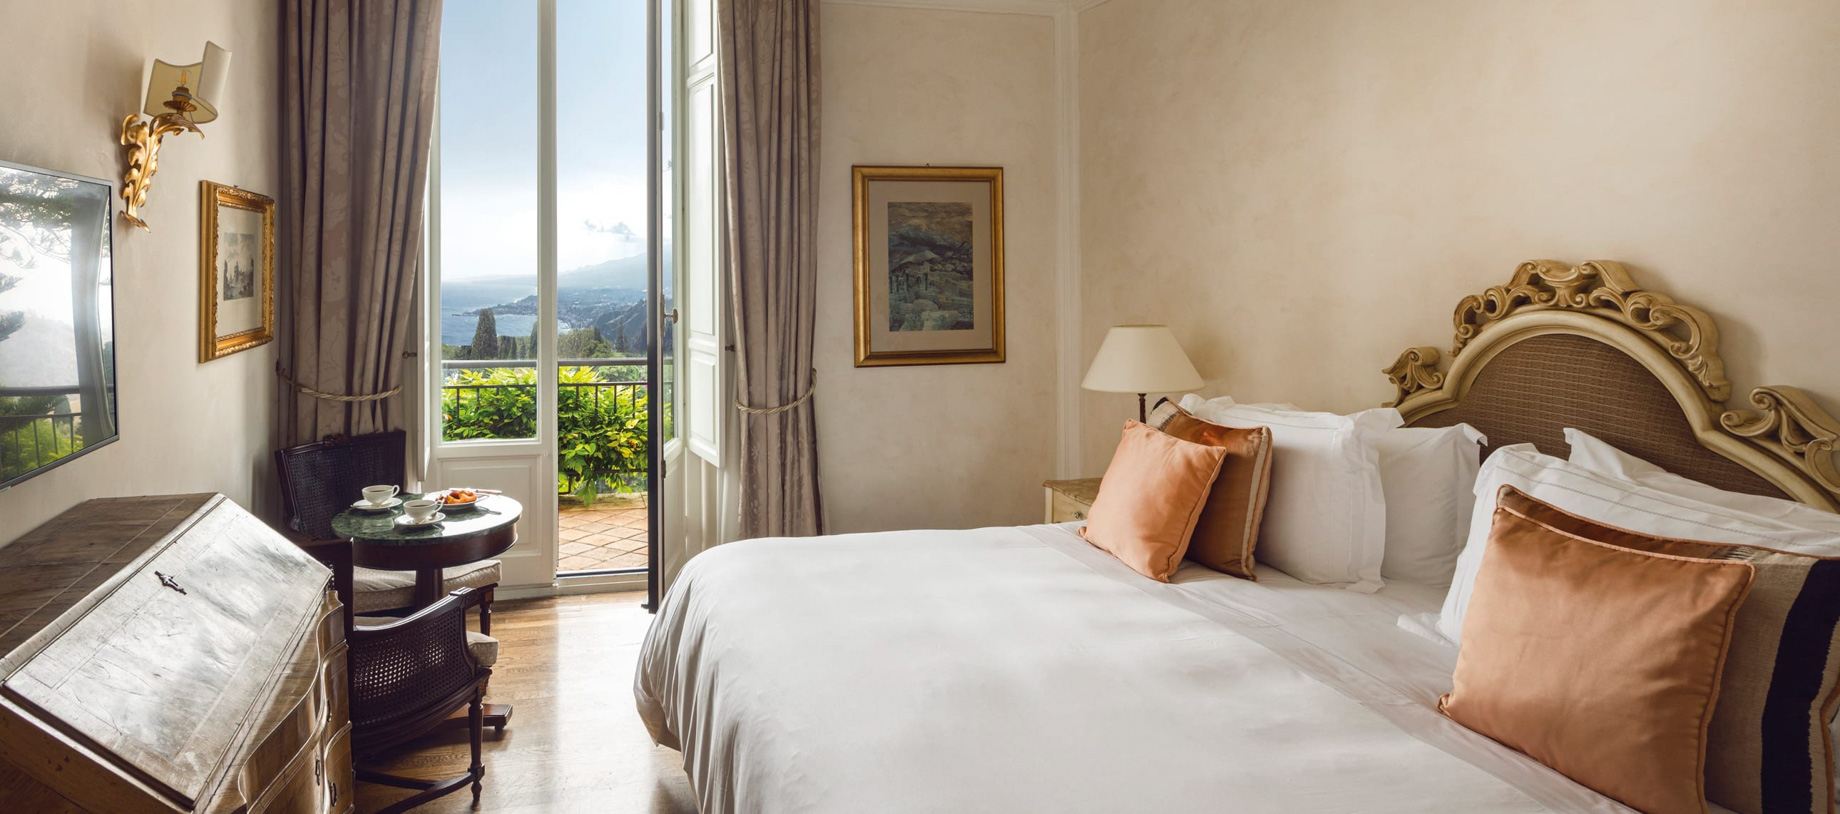 146 – Grand Hotel Timeo, A Belmond Hotel – Taormina, Italy – Deluxe Sea View Suite